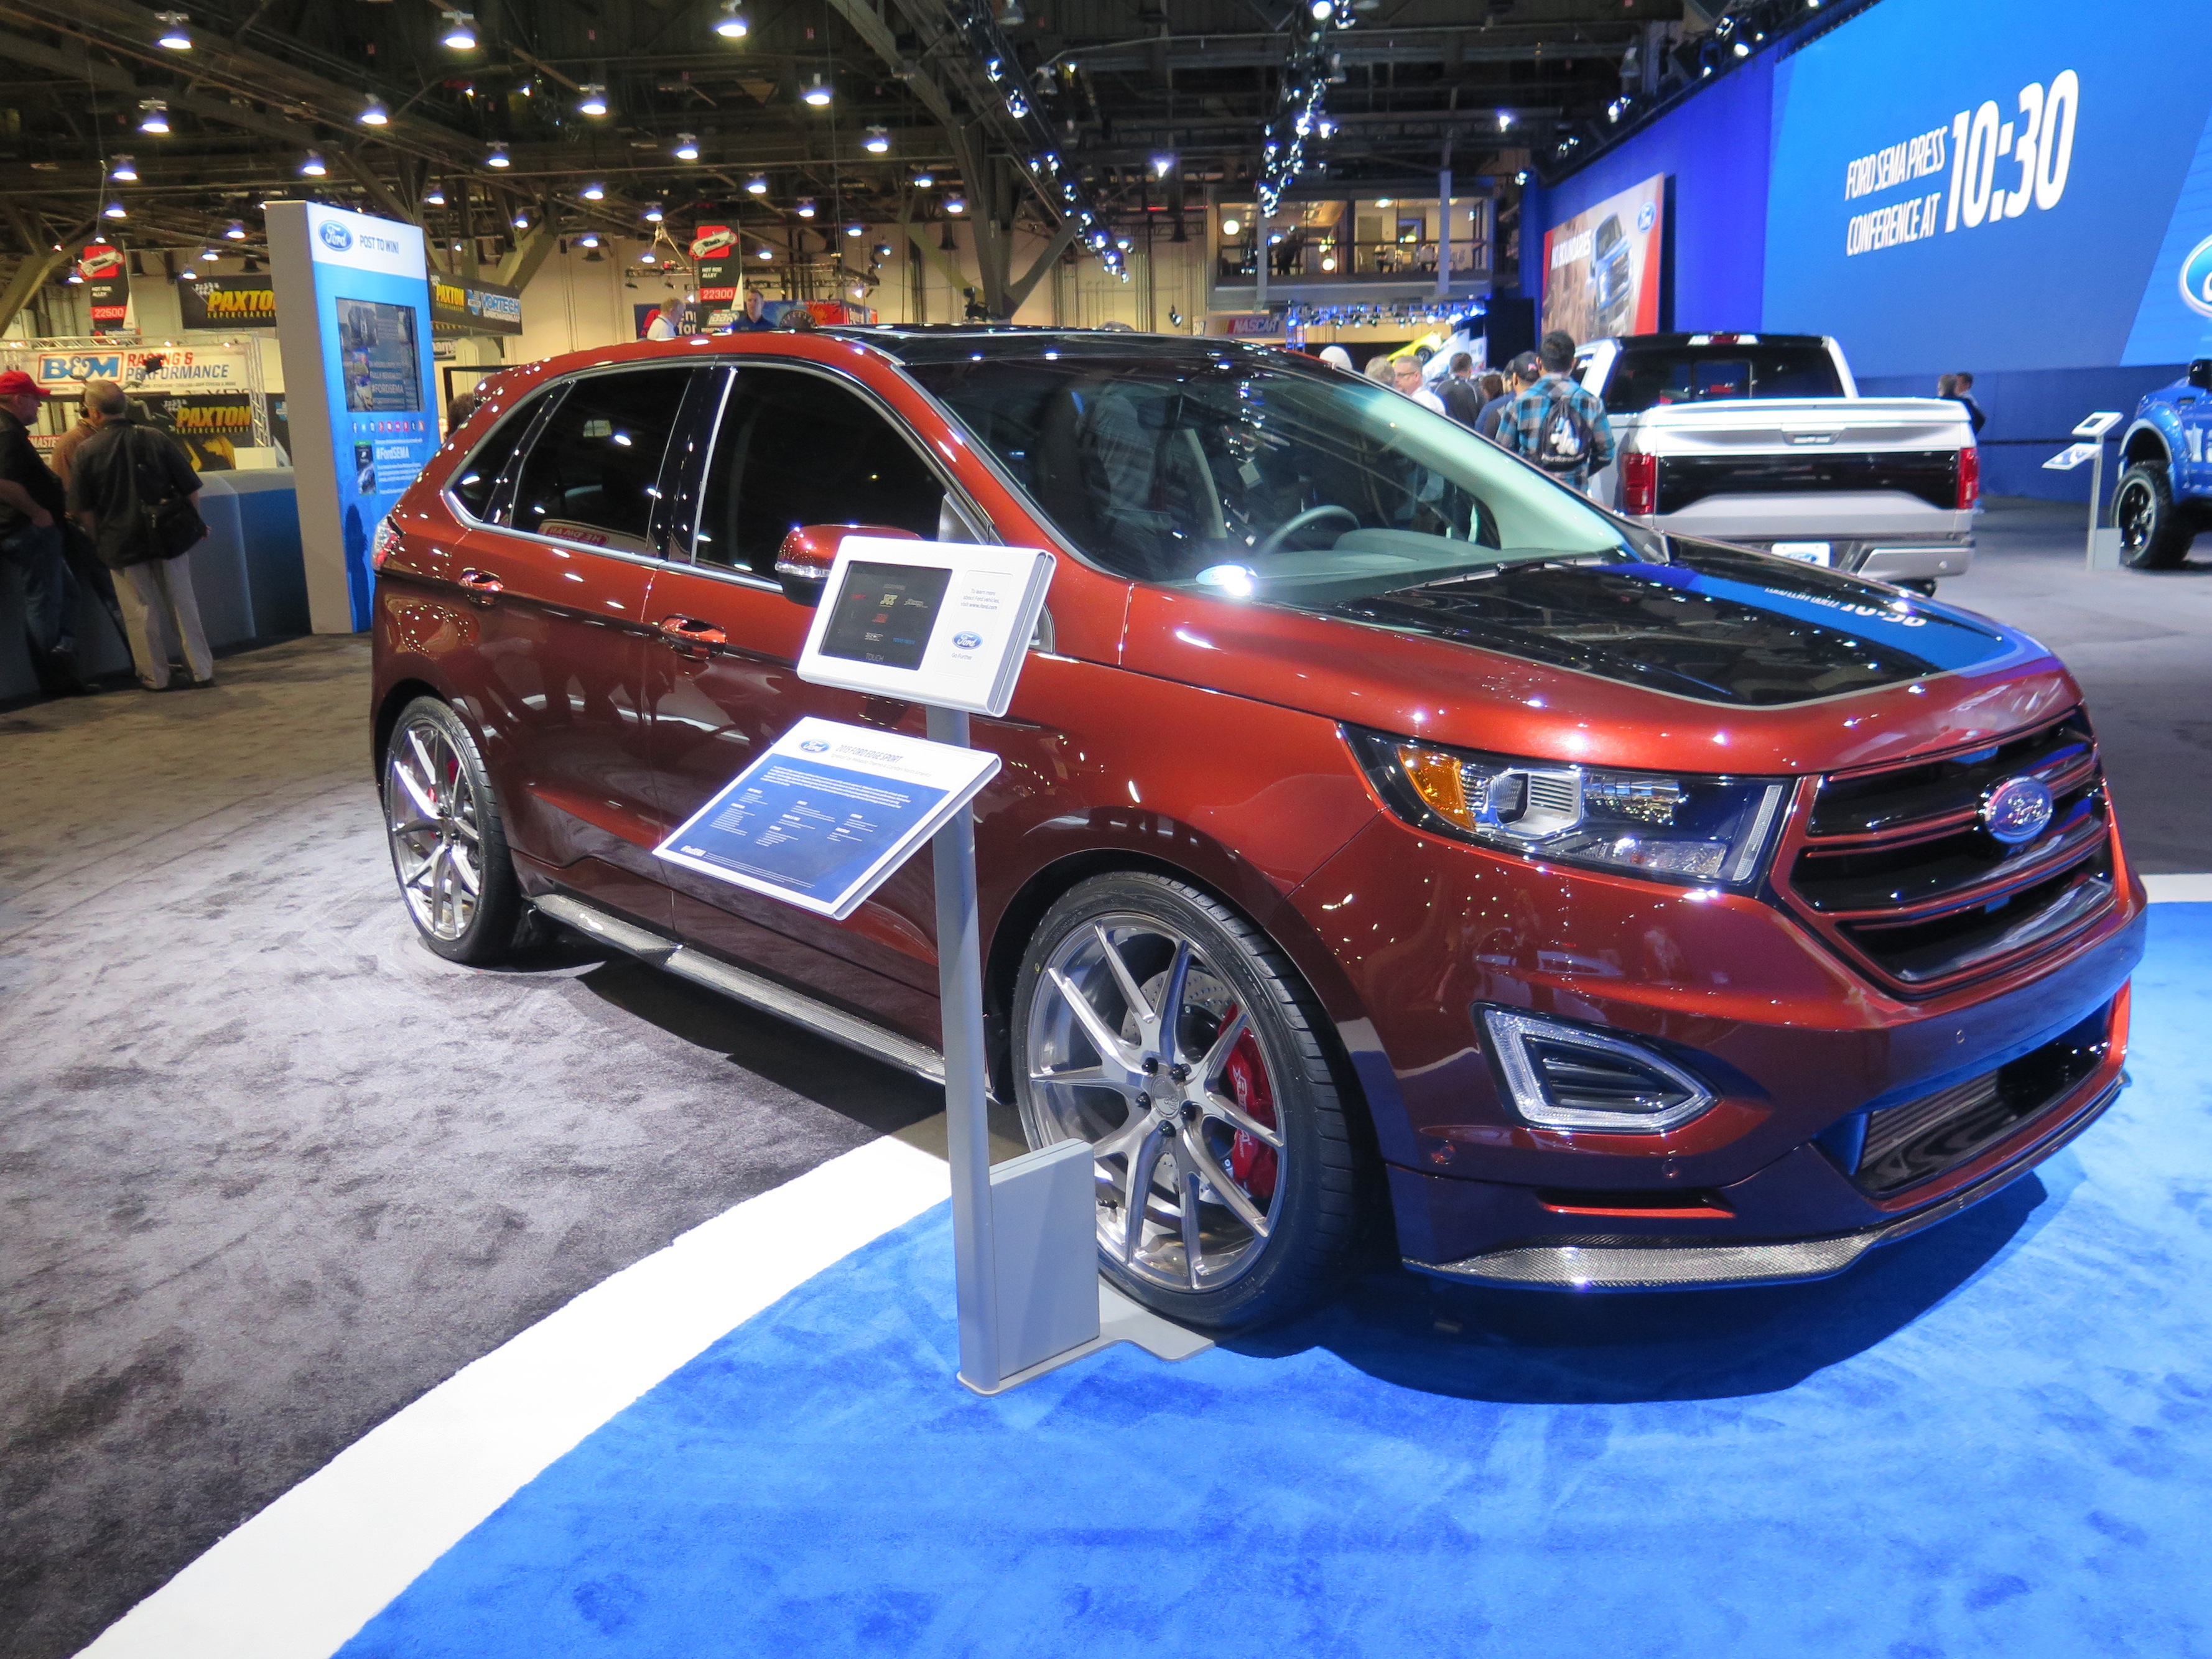 Both a  Webasto Hollandia 740 Inbuilt Sunroof and a Webasto Thermo Top Evo engine pre-heater were installed in the Ford Edge Sport, nicknamed, “Ignition.”